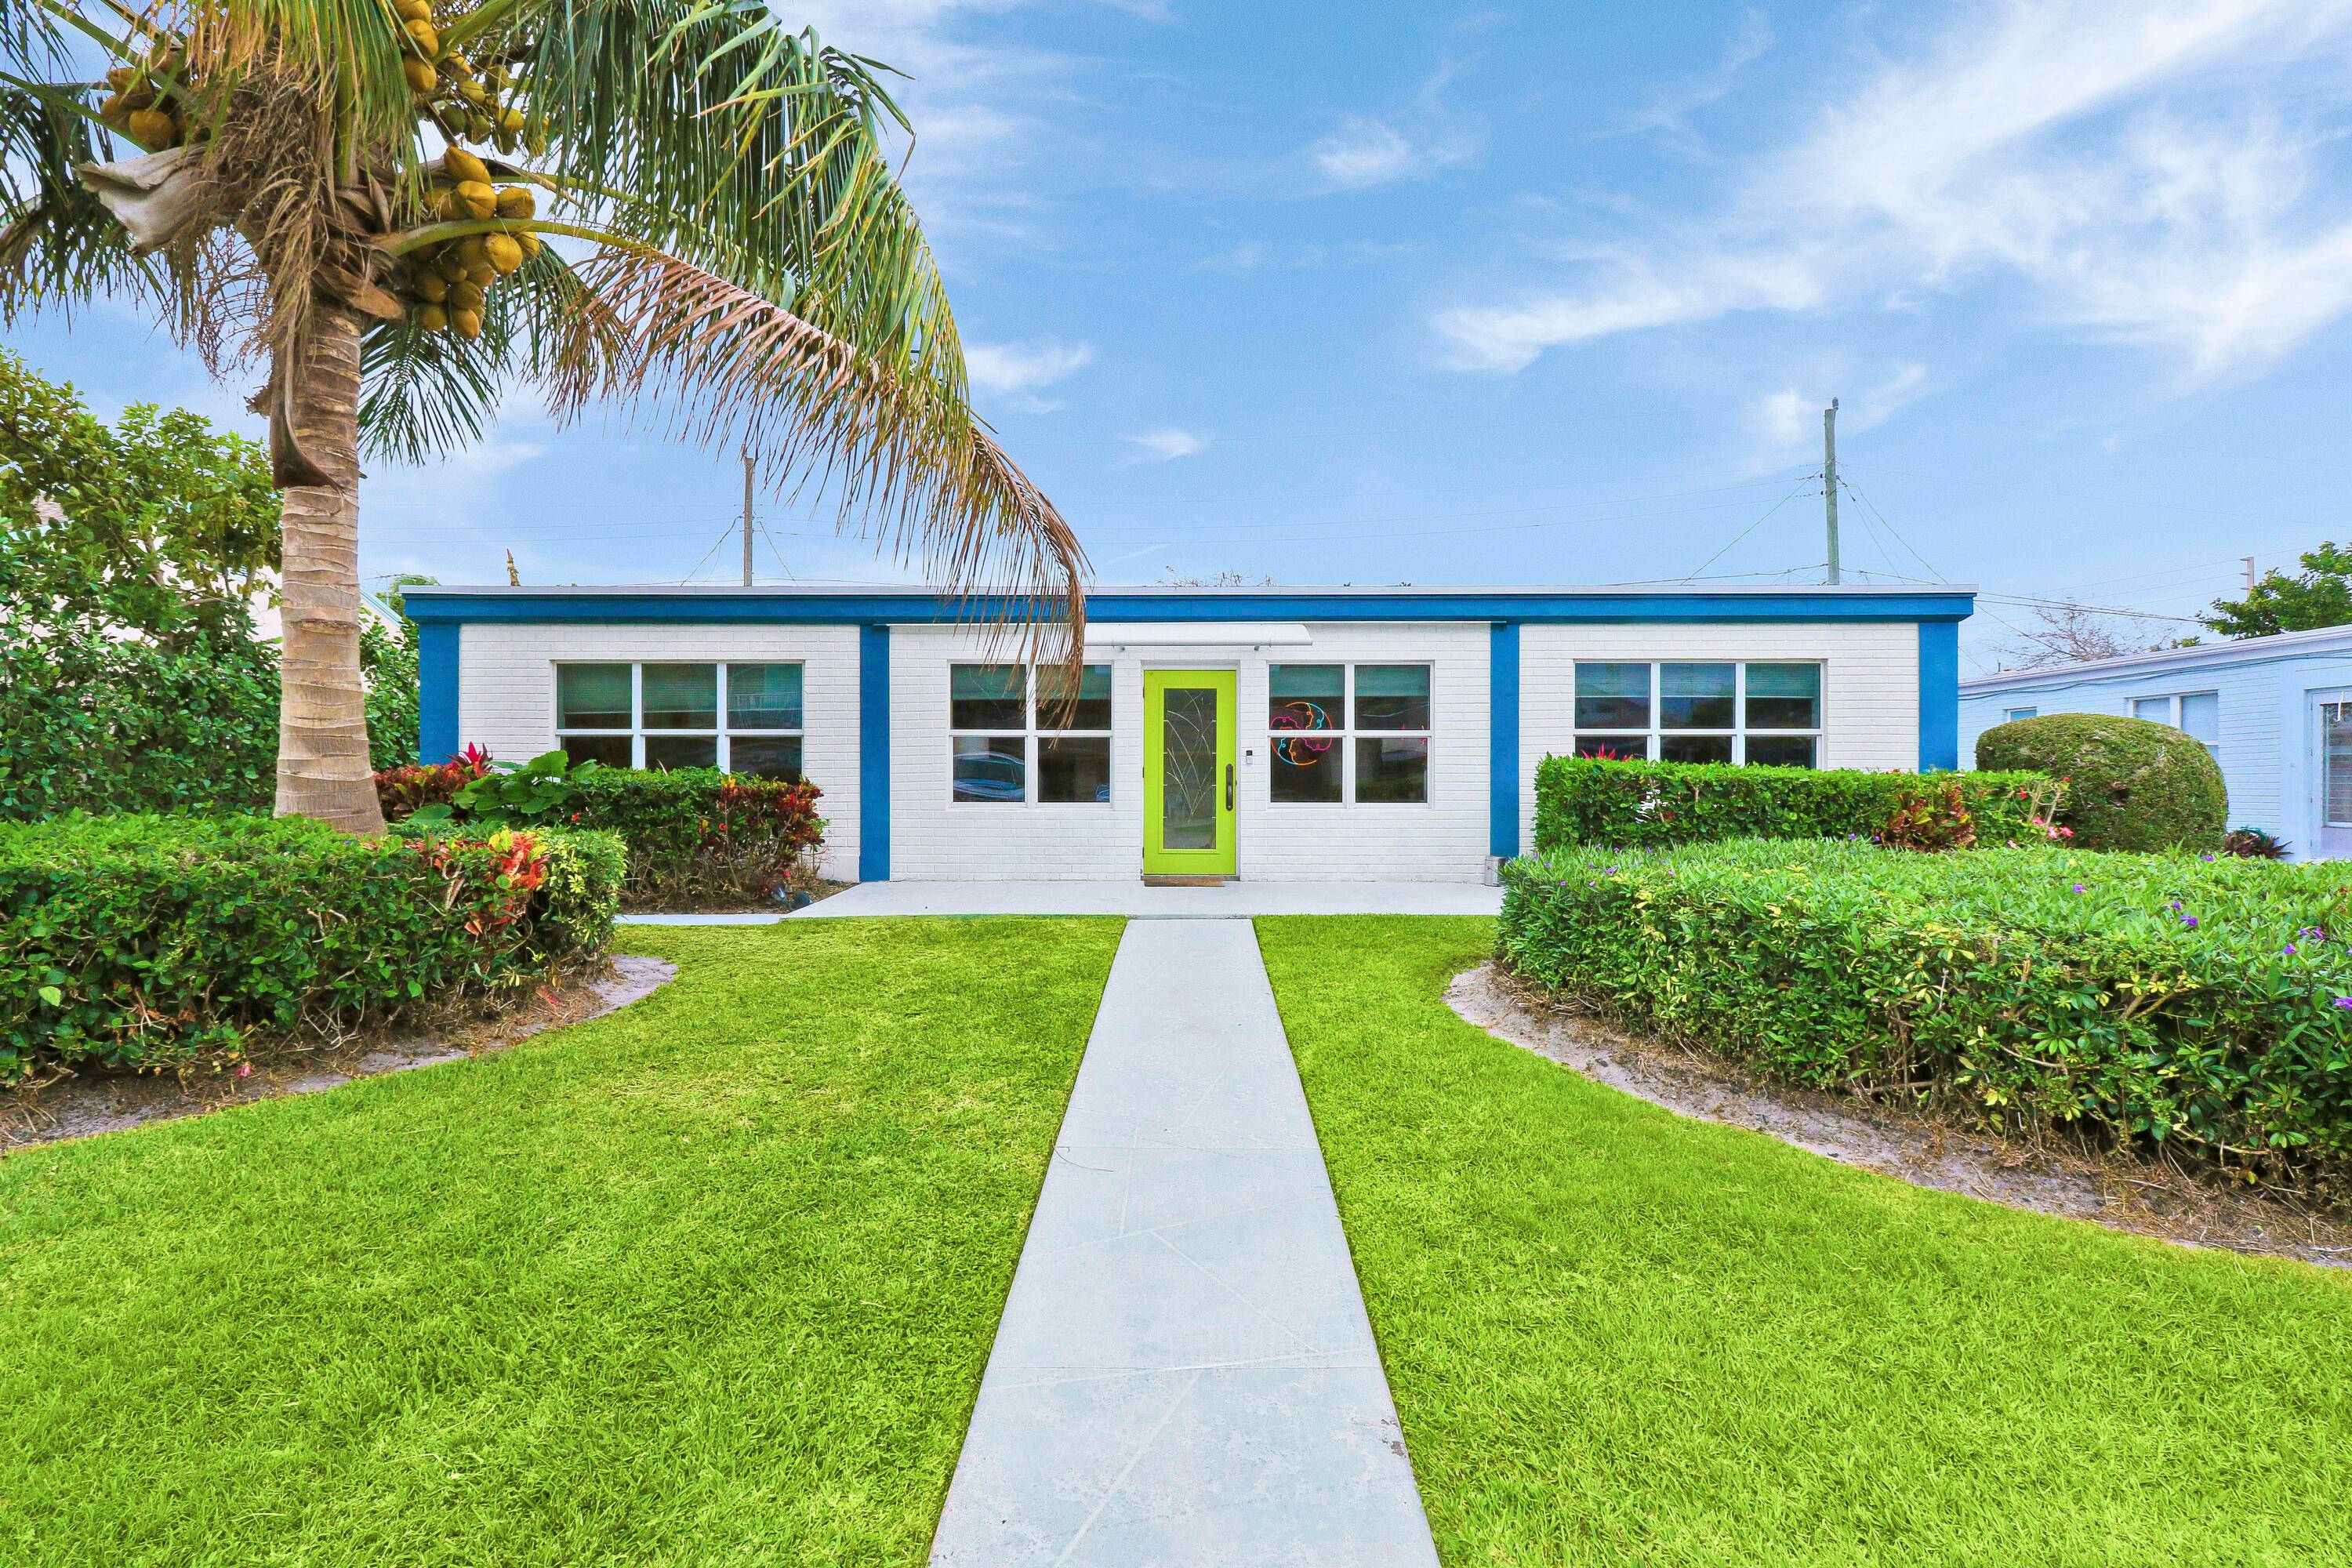 Experience this stunning 3 bedroom mid century home, seamlessly transformed to contemporary perfection, mere minutes from the Intracoastal, beaches, and more !